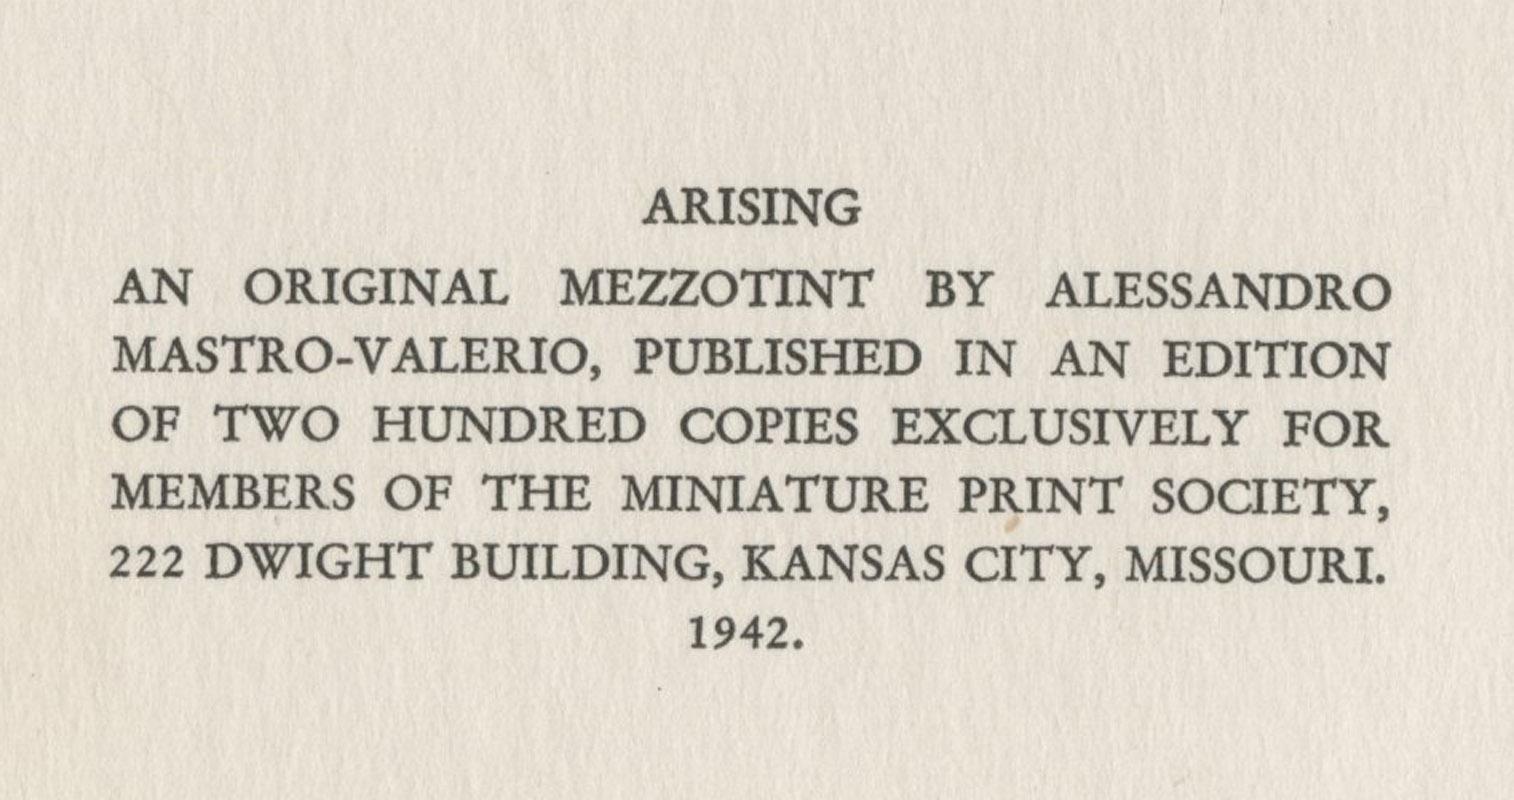 Arising
Mezzotint, 1942
Signed in pencil lower right (see photo)
Publisher : Issued by the Miniature Print Collectors Society.
Edition: 200
Condition: Mint
      Archival framing with Museum Glass
Image/Plate size: 2 3/8 x 2 7/8 inches
Sheet size: 3